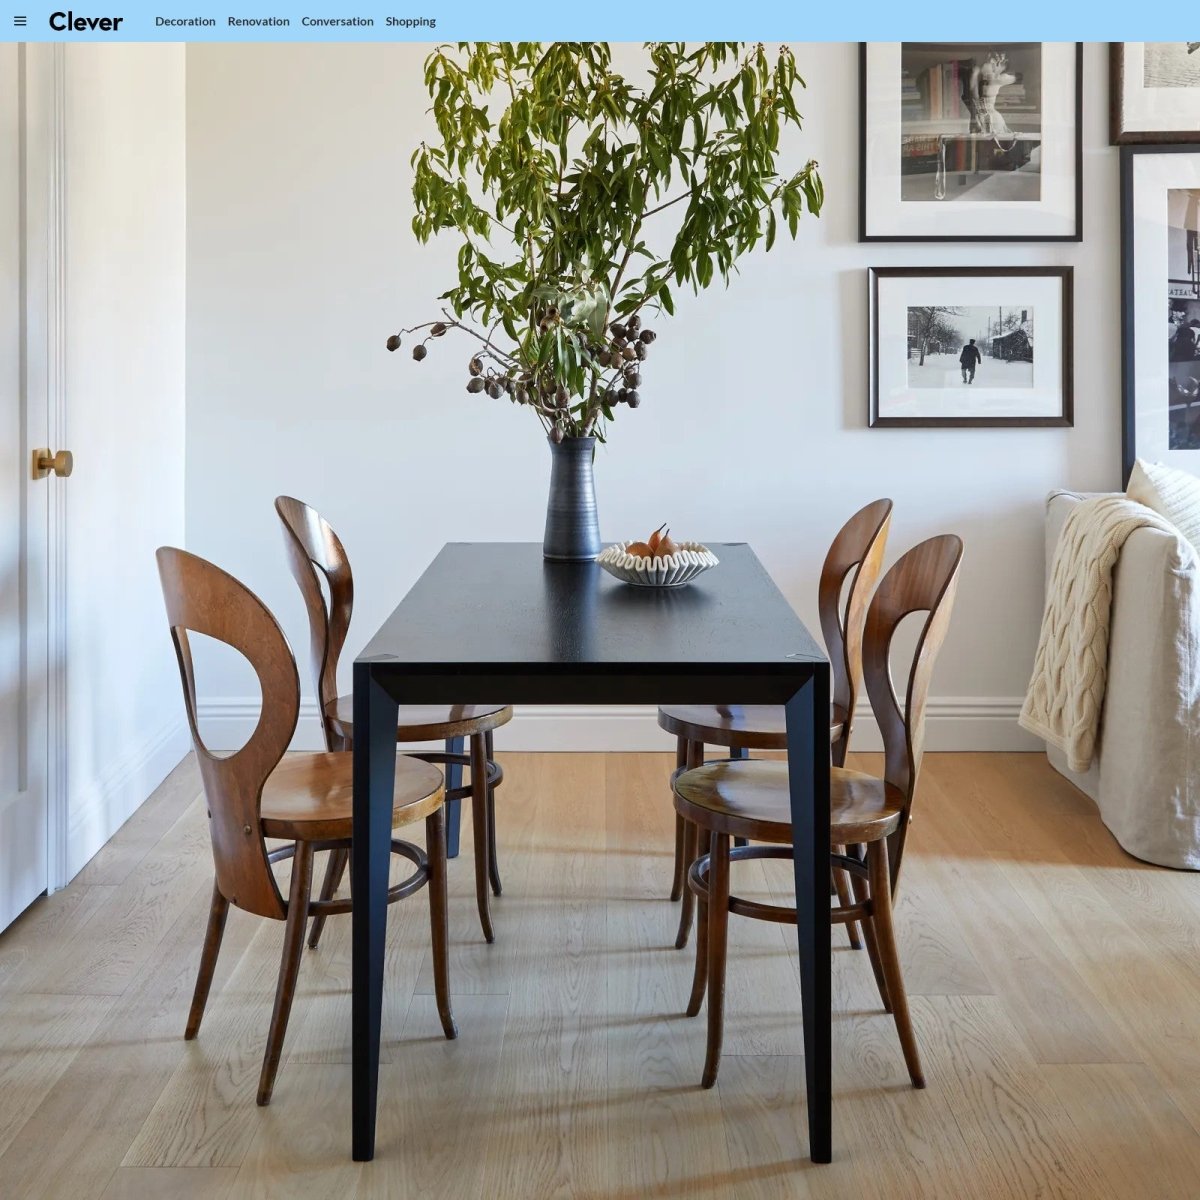 Ebonized MiMi table spotted on AD's Clever - miduny